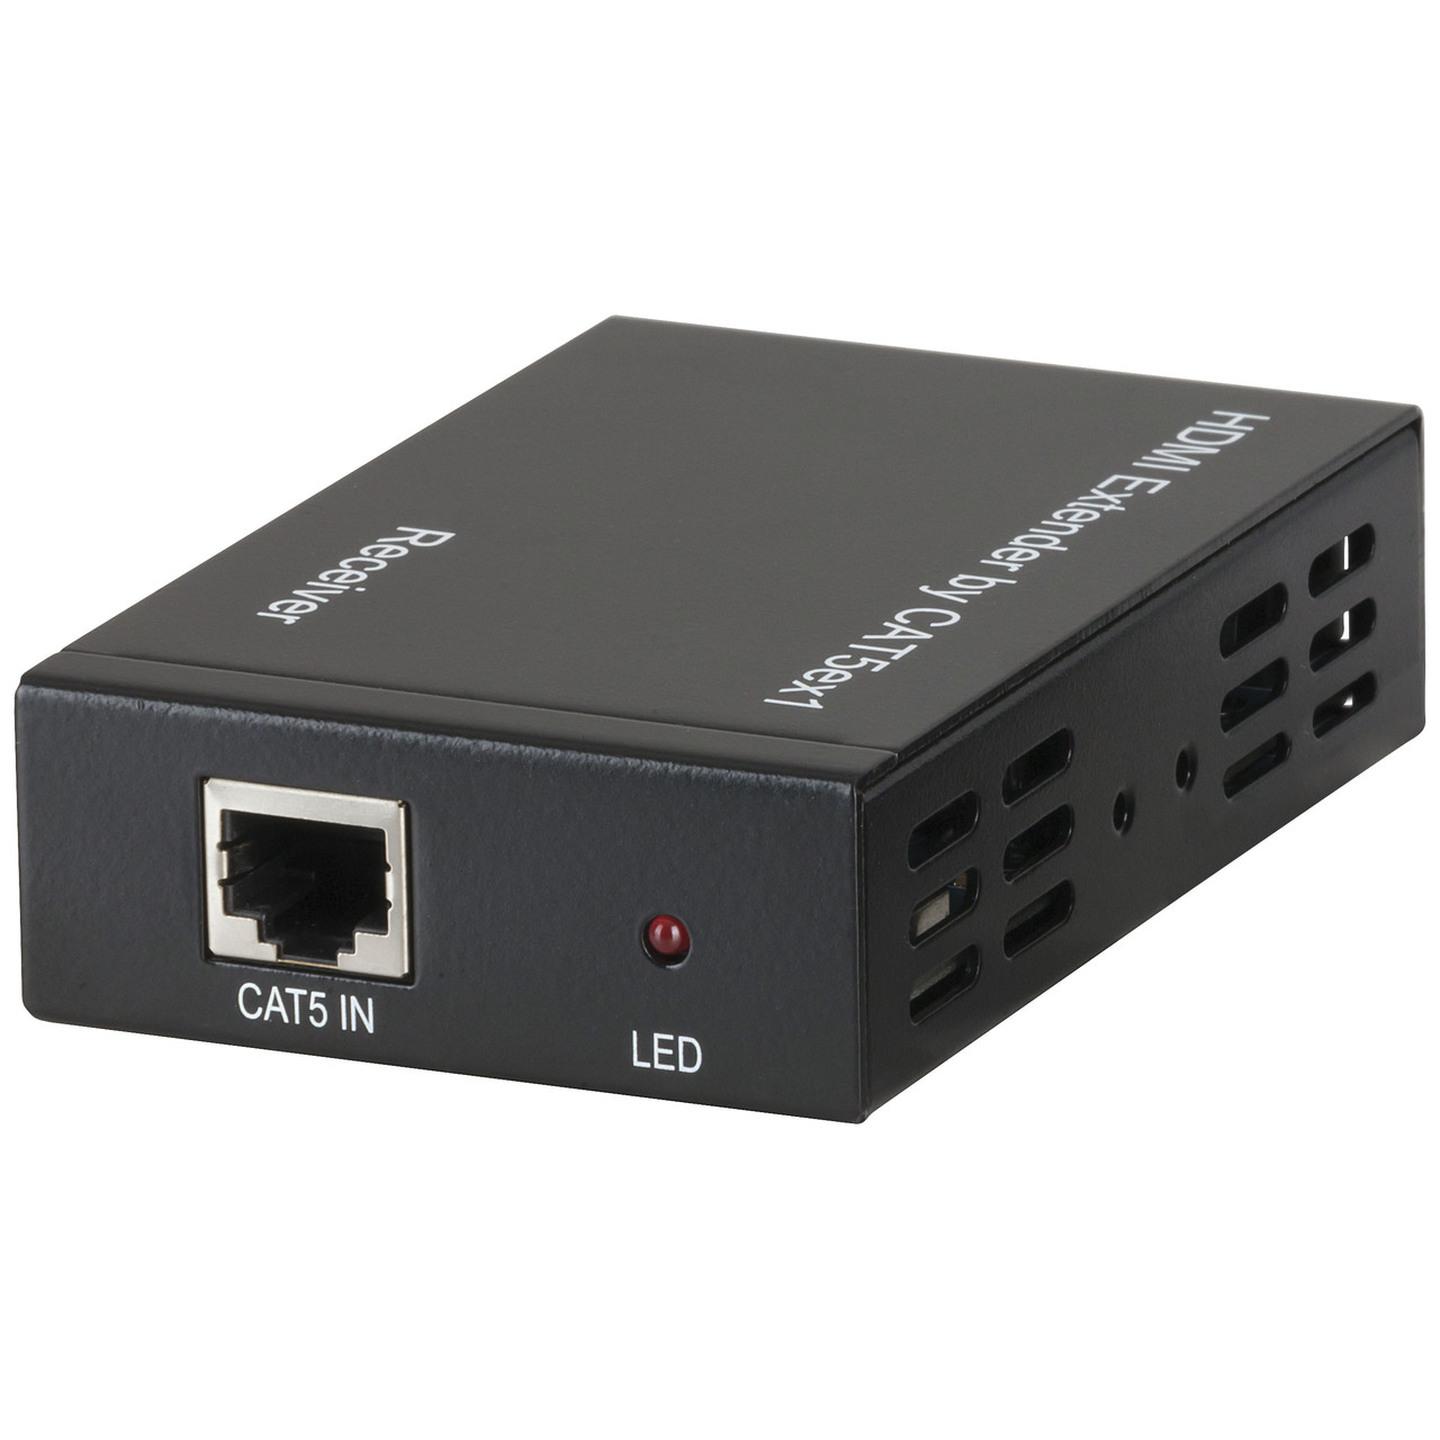 Spare TCP/IP HDMI Extender Receiver for AC-1734 TCP/IP HDMI Extender